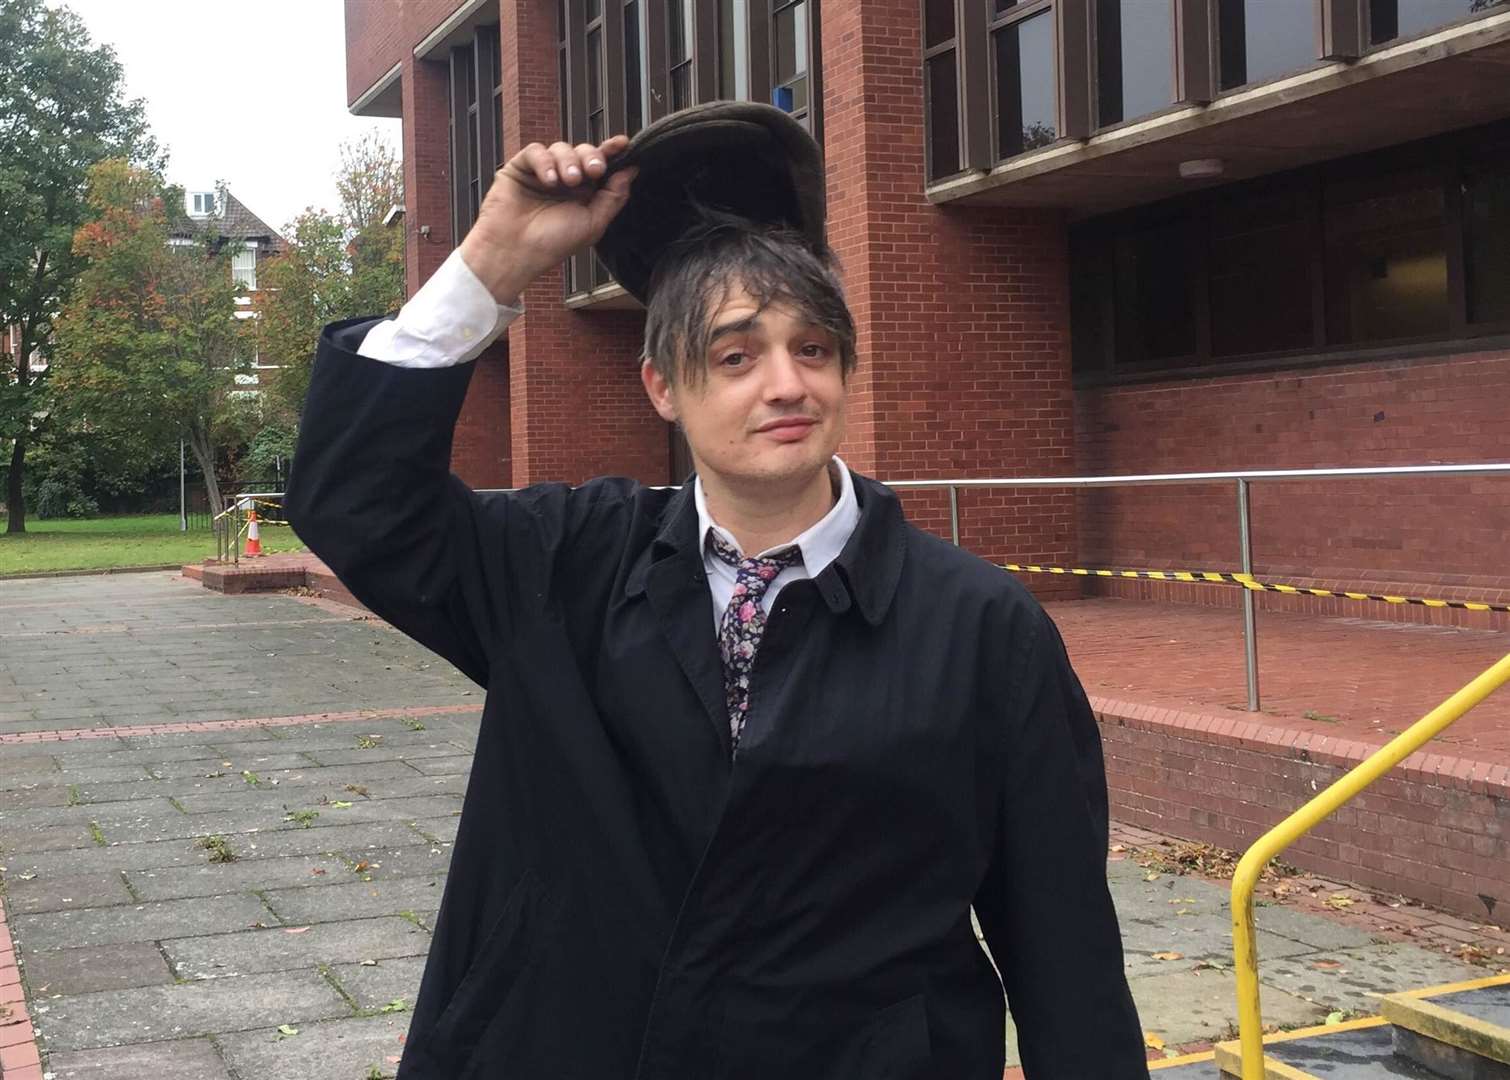 'Ouch'- Pete Doherty doffed his hat after being banned from driving